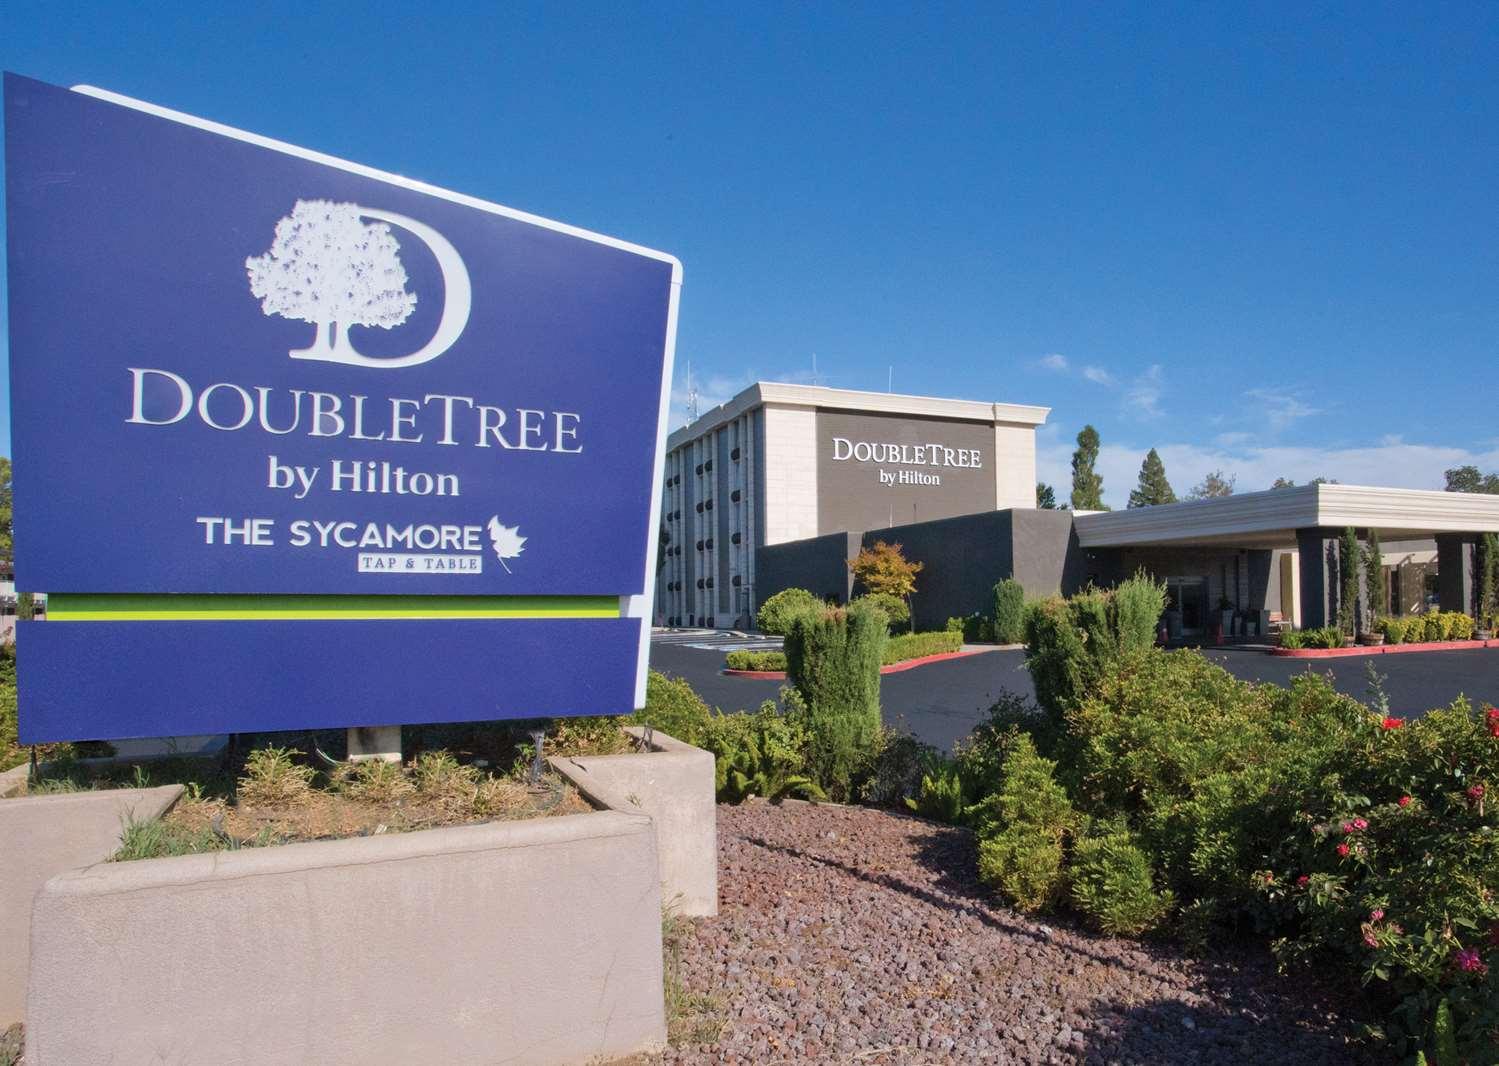 DoubleTree by Hilton Chico in Chico, CA